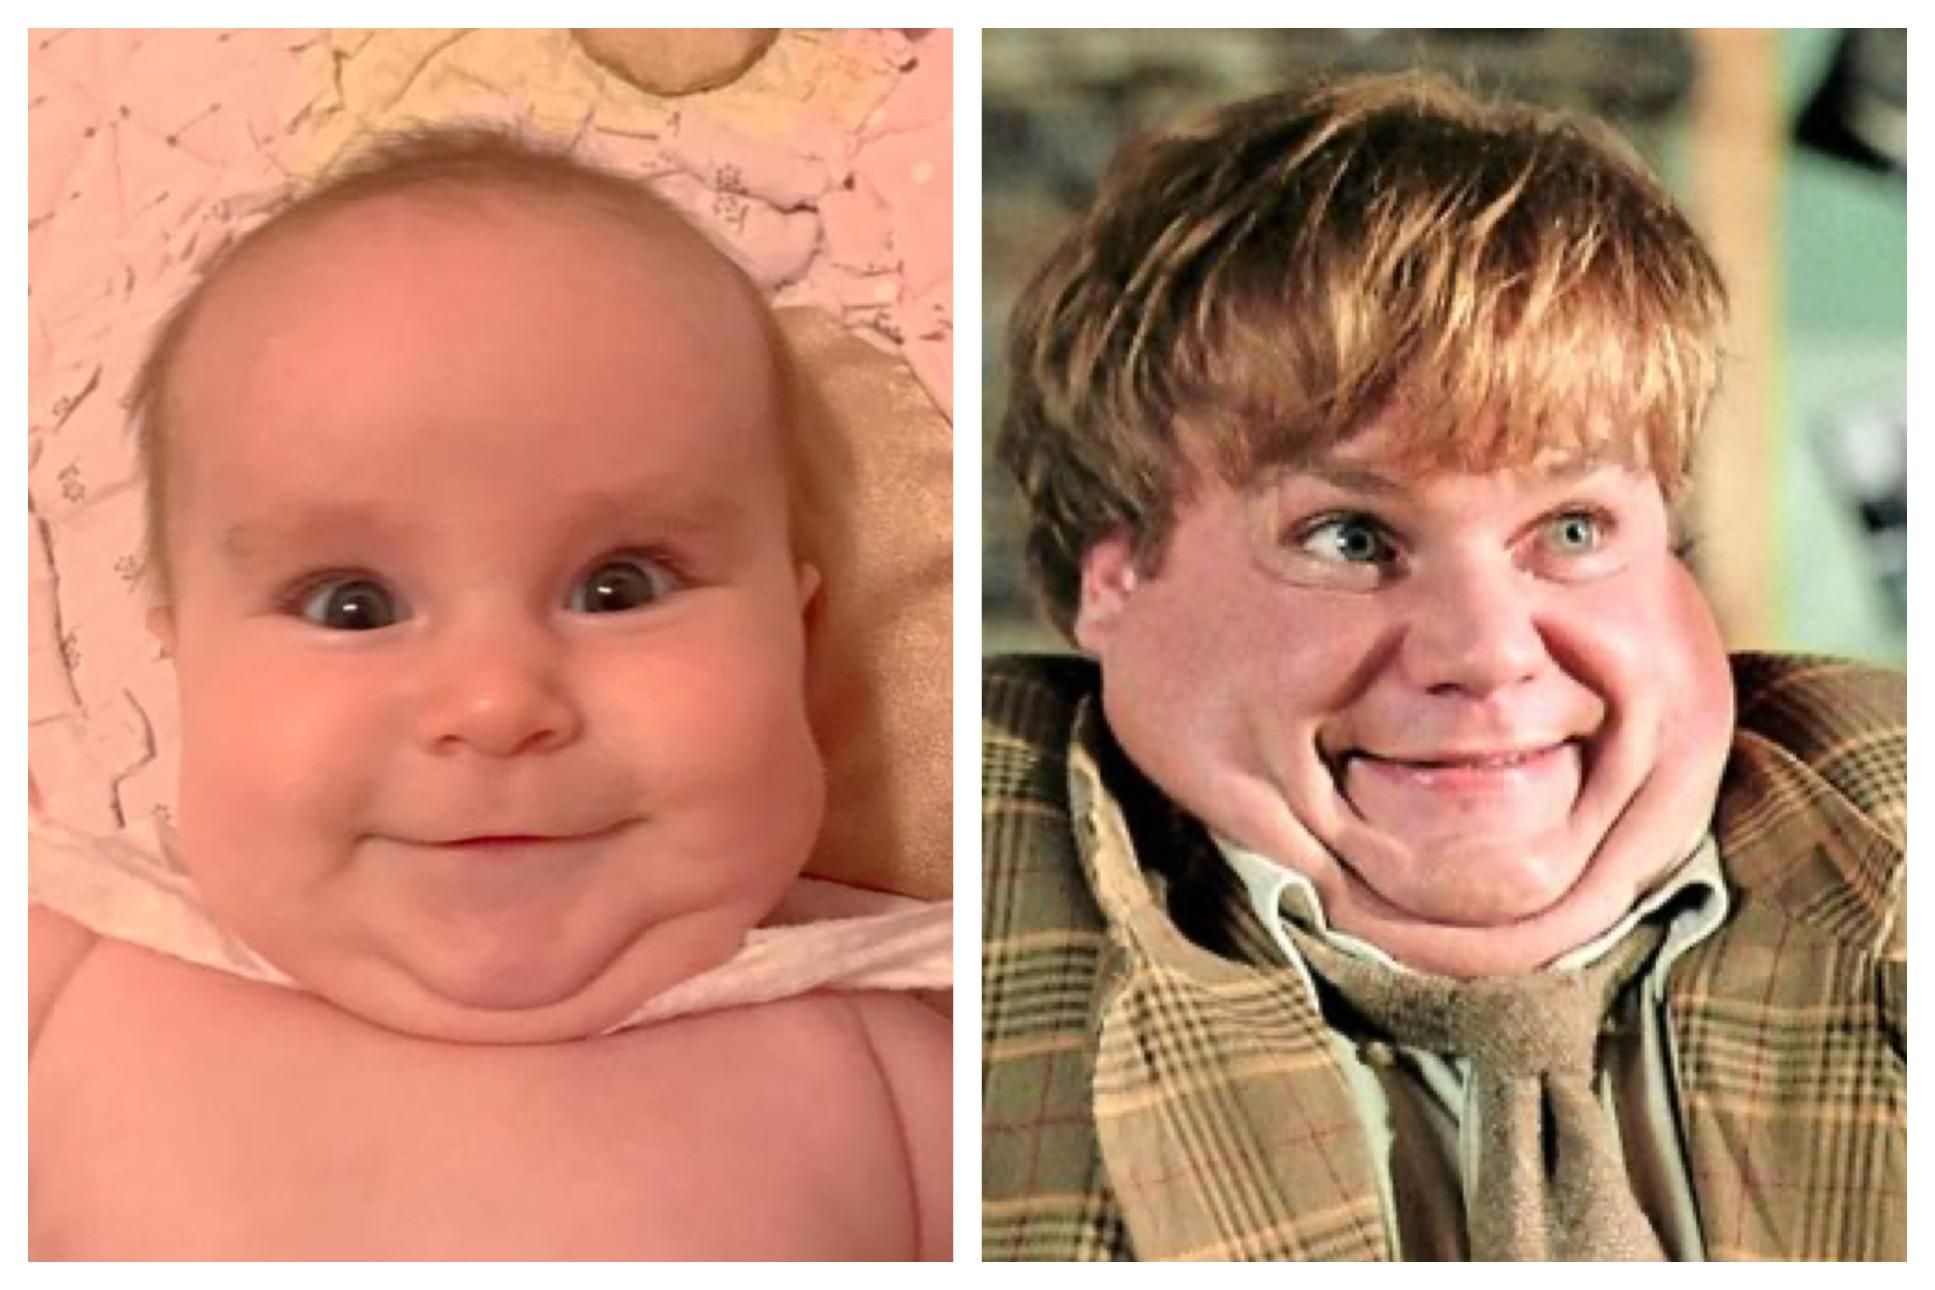 My daughter at 5 months years old vs Chris Farley at 31 years old.